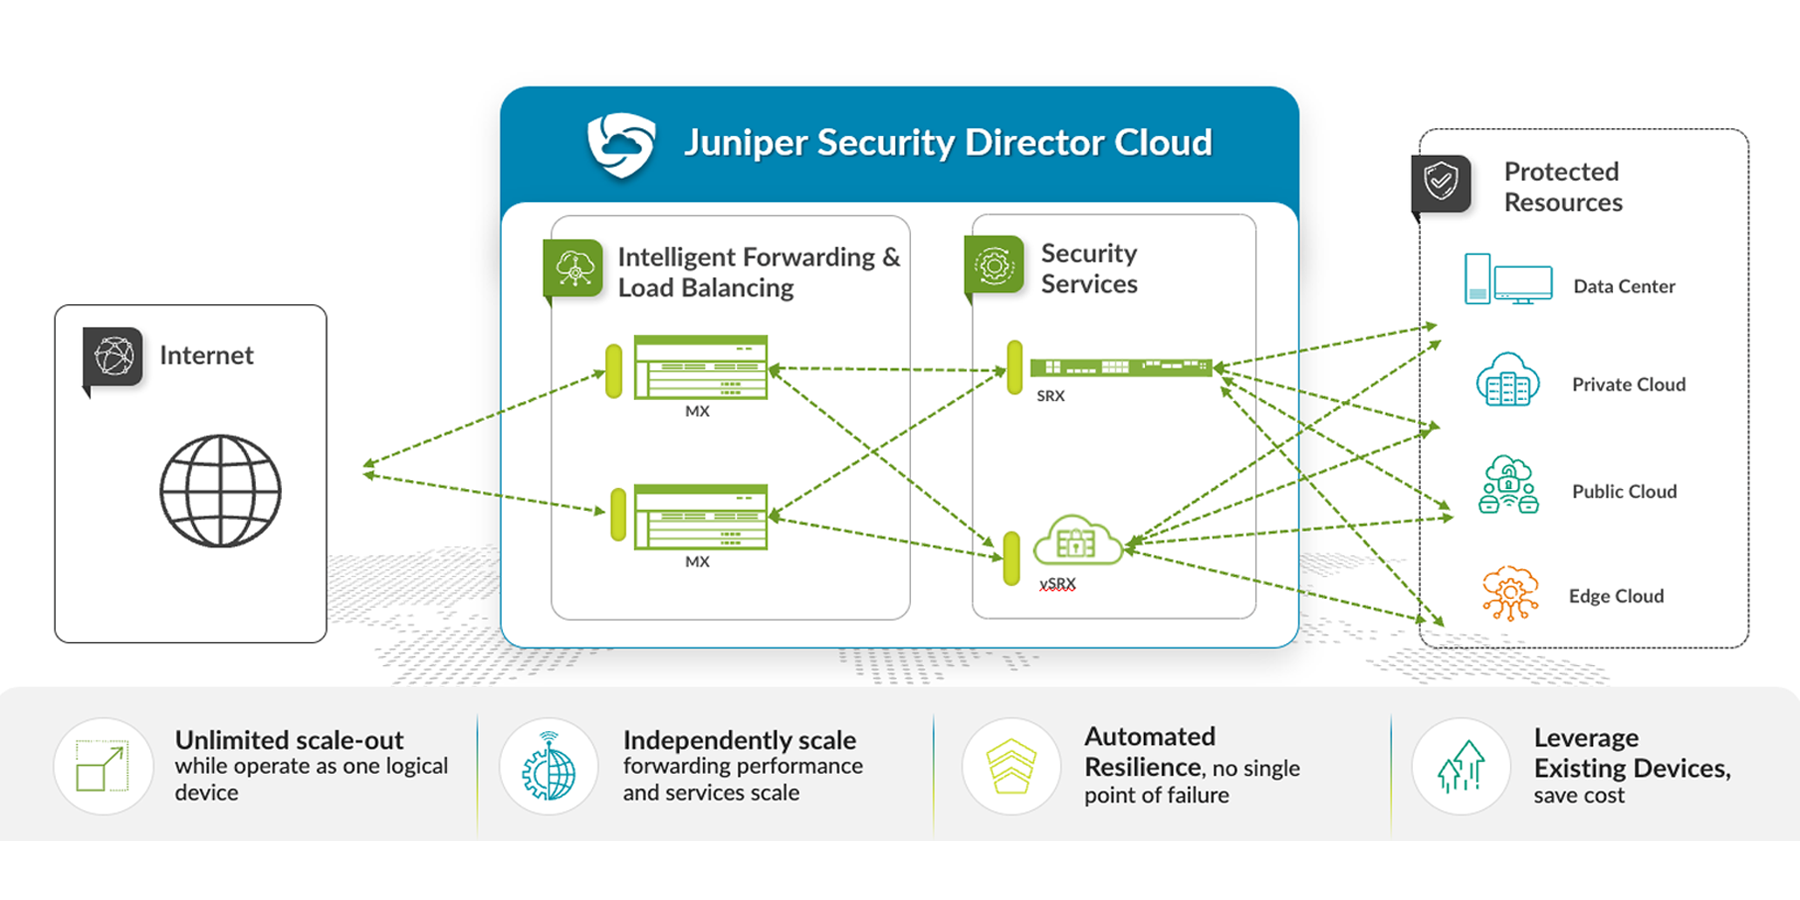 Juniper Networks Evolves Modern Data Center Security with the Industry’s First Distributed Security Services Architecture